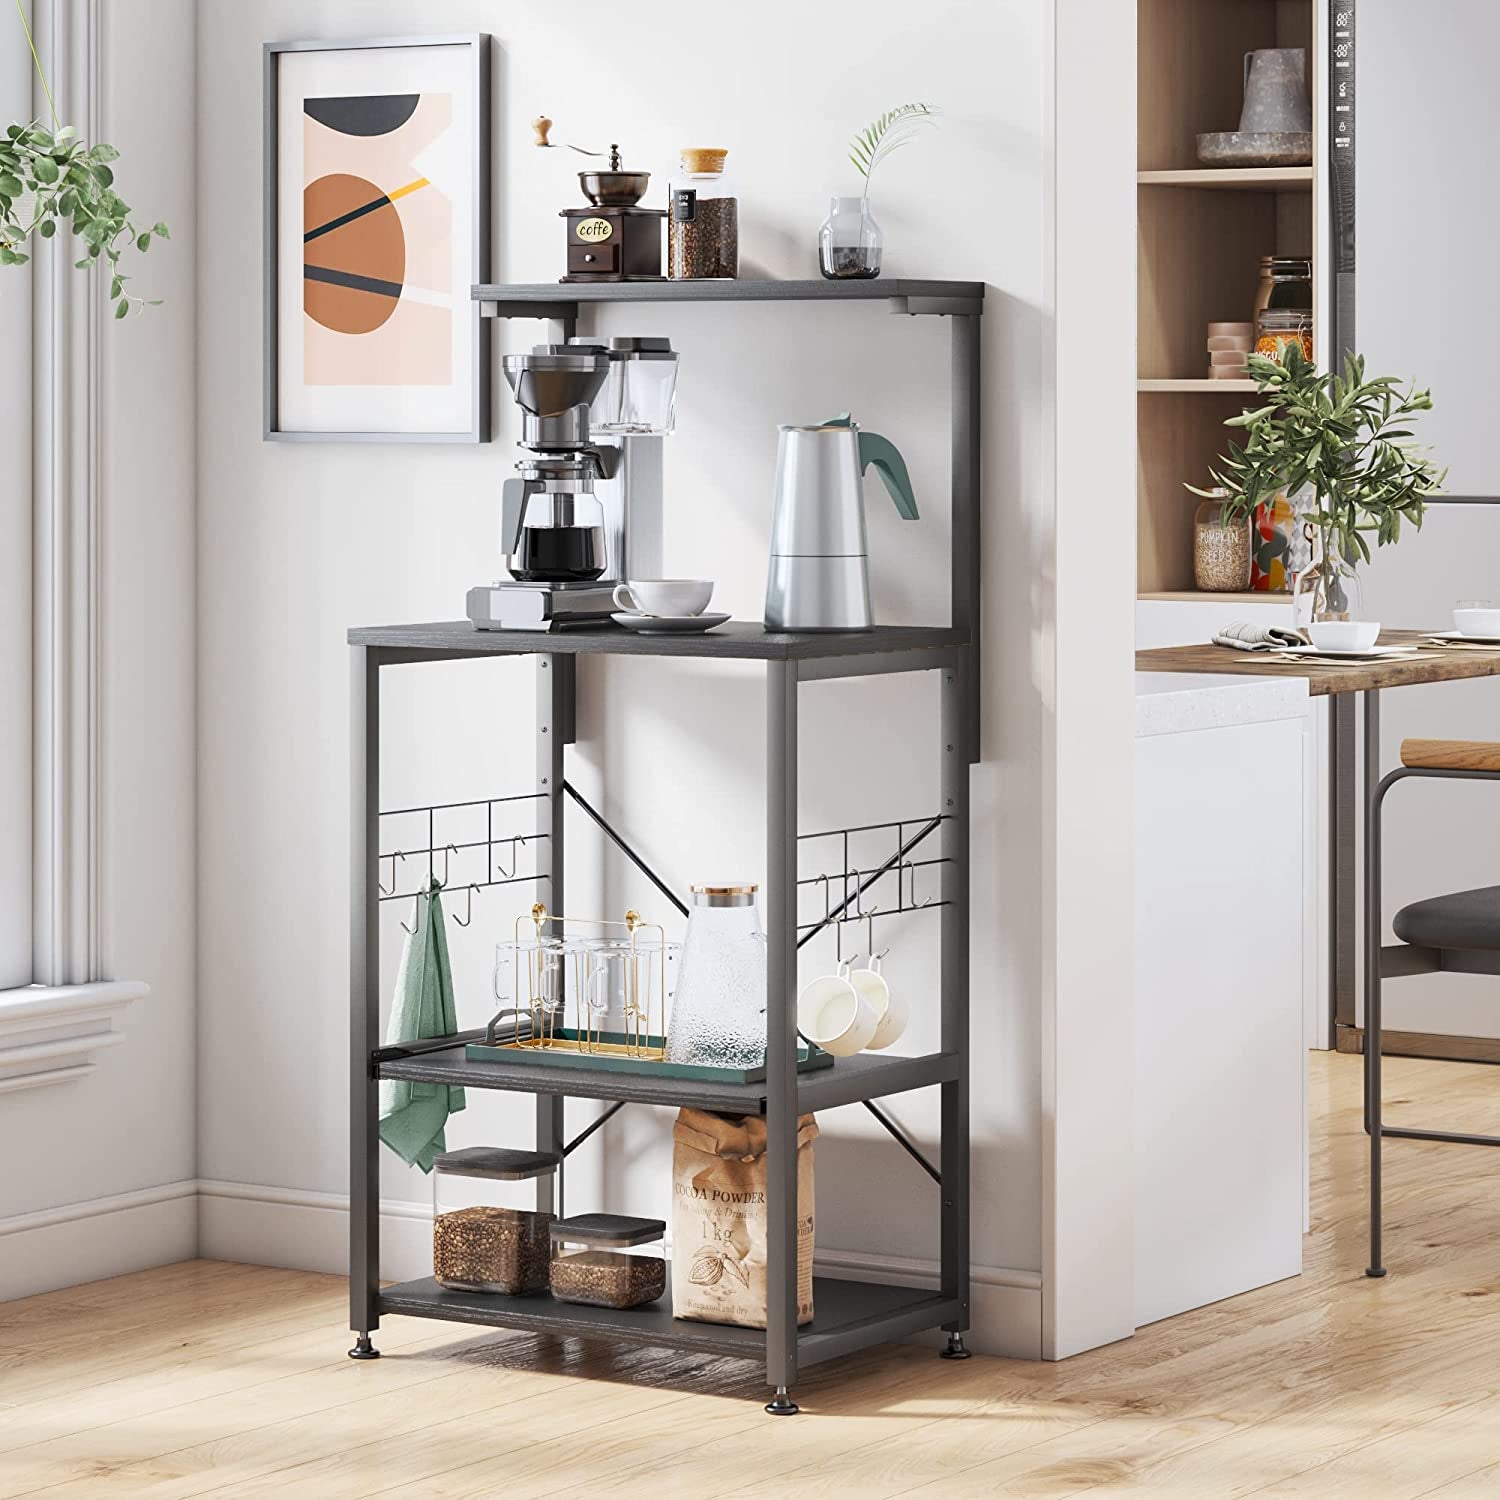 Kitchen Bakers Rack Microwave Stand Kitchen Cart on Wheels Utility Storage Shelf with 10 Side Hooks Kitchen Organizer Shelves with Adjustable Feet